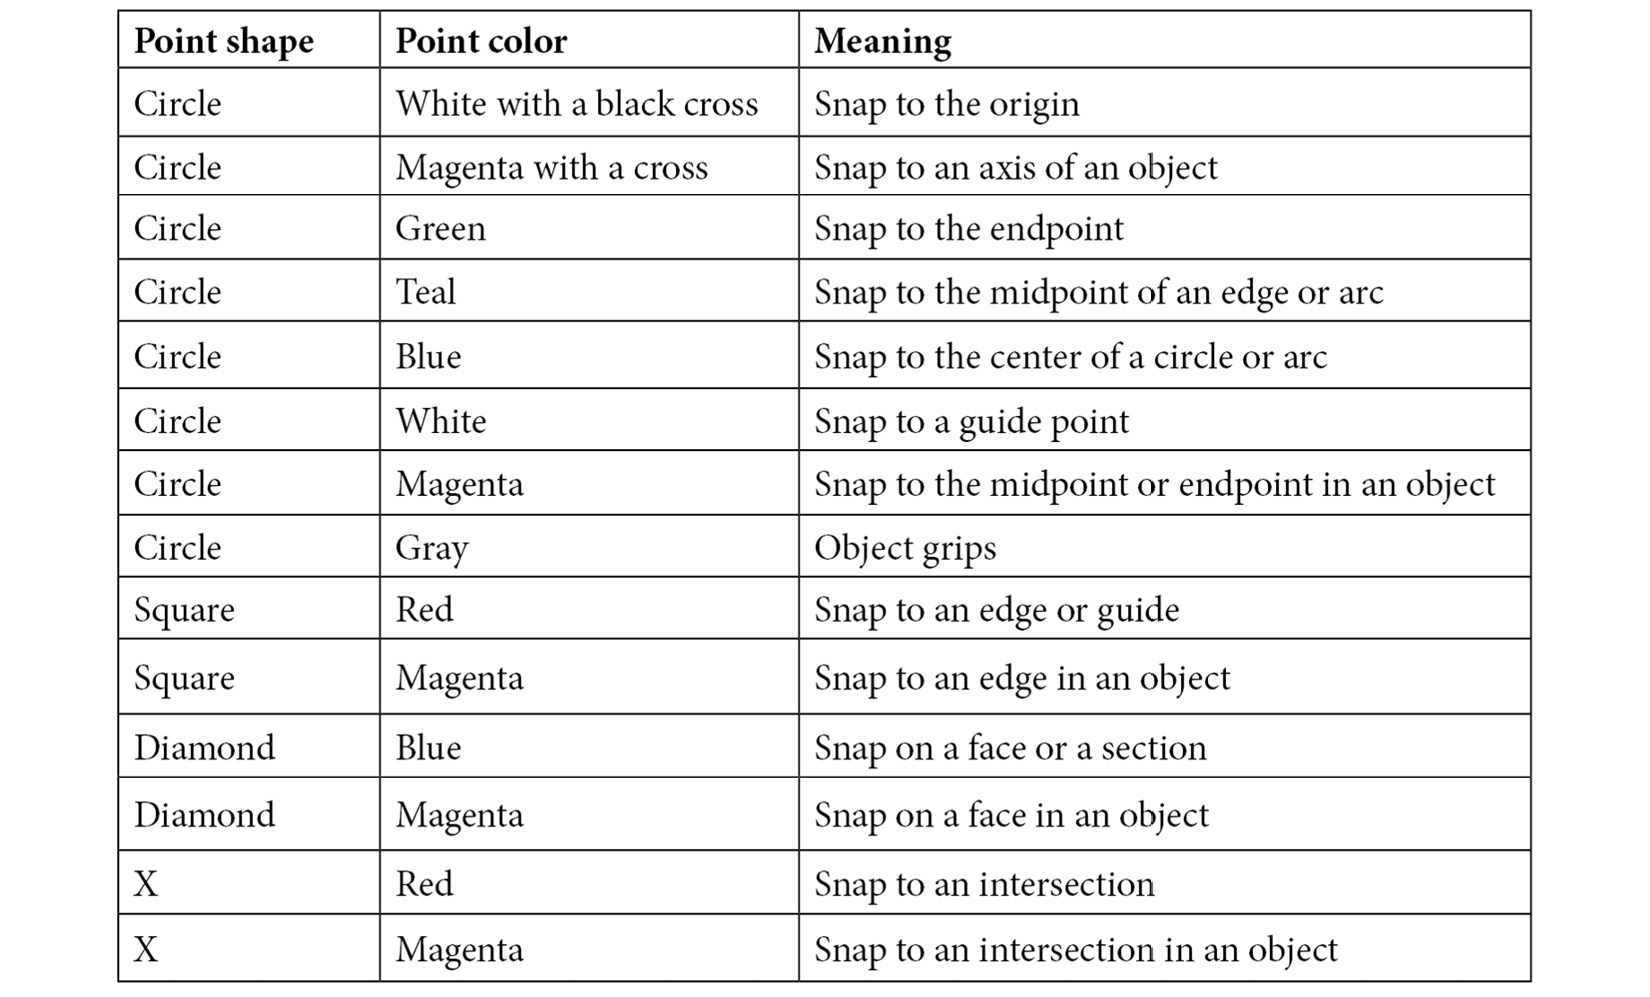 Figure 4.6 – Points, colors, and snap types
